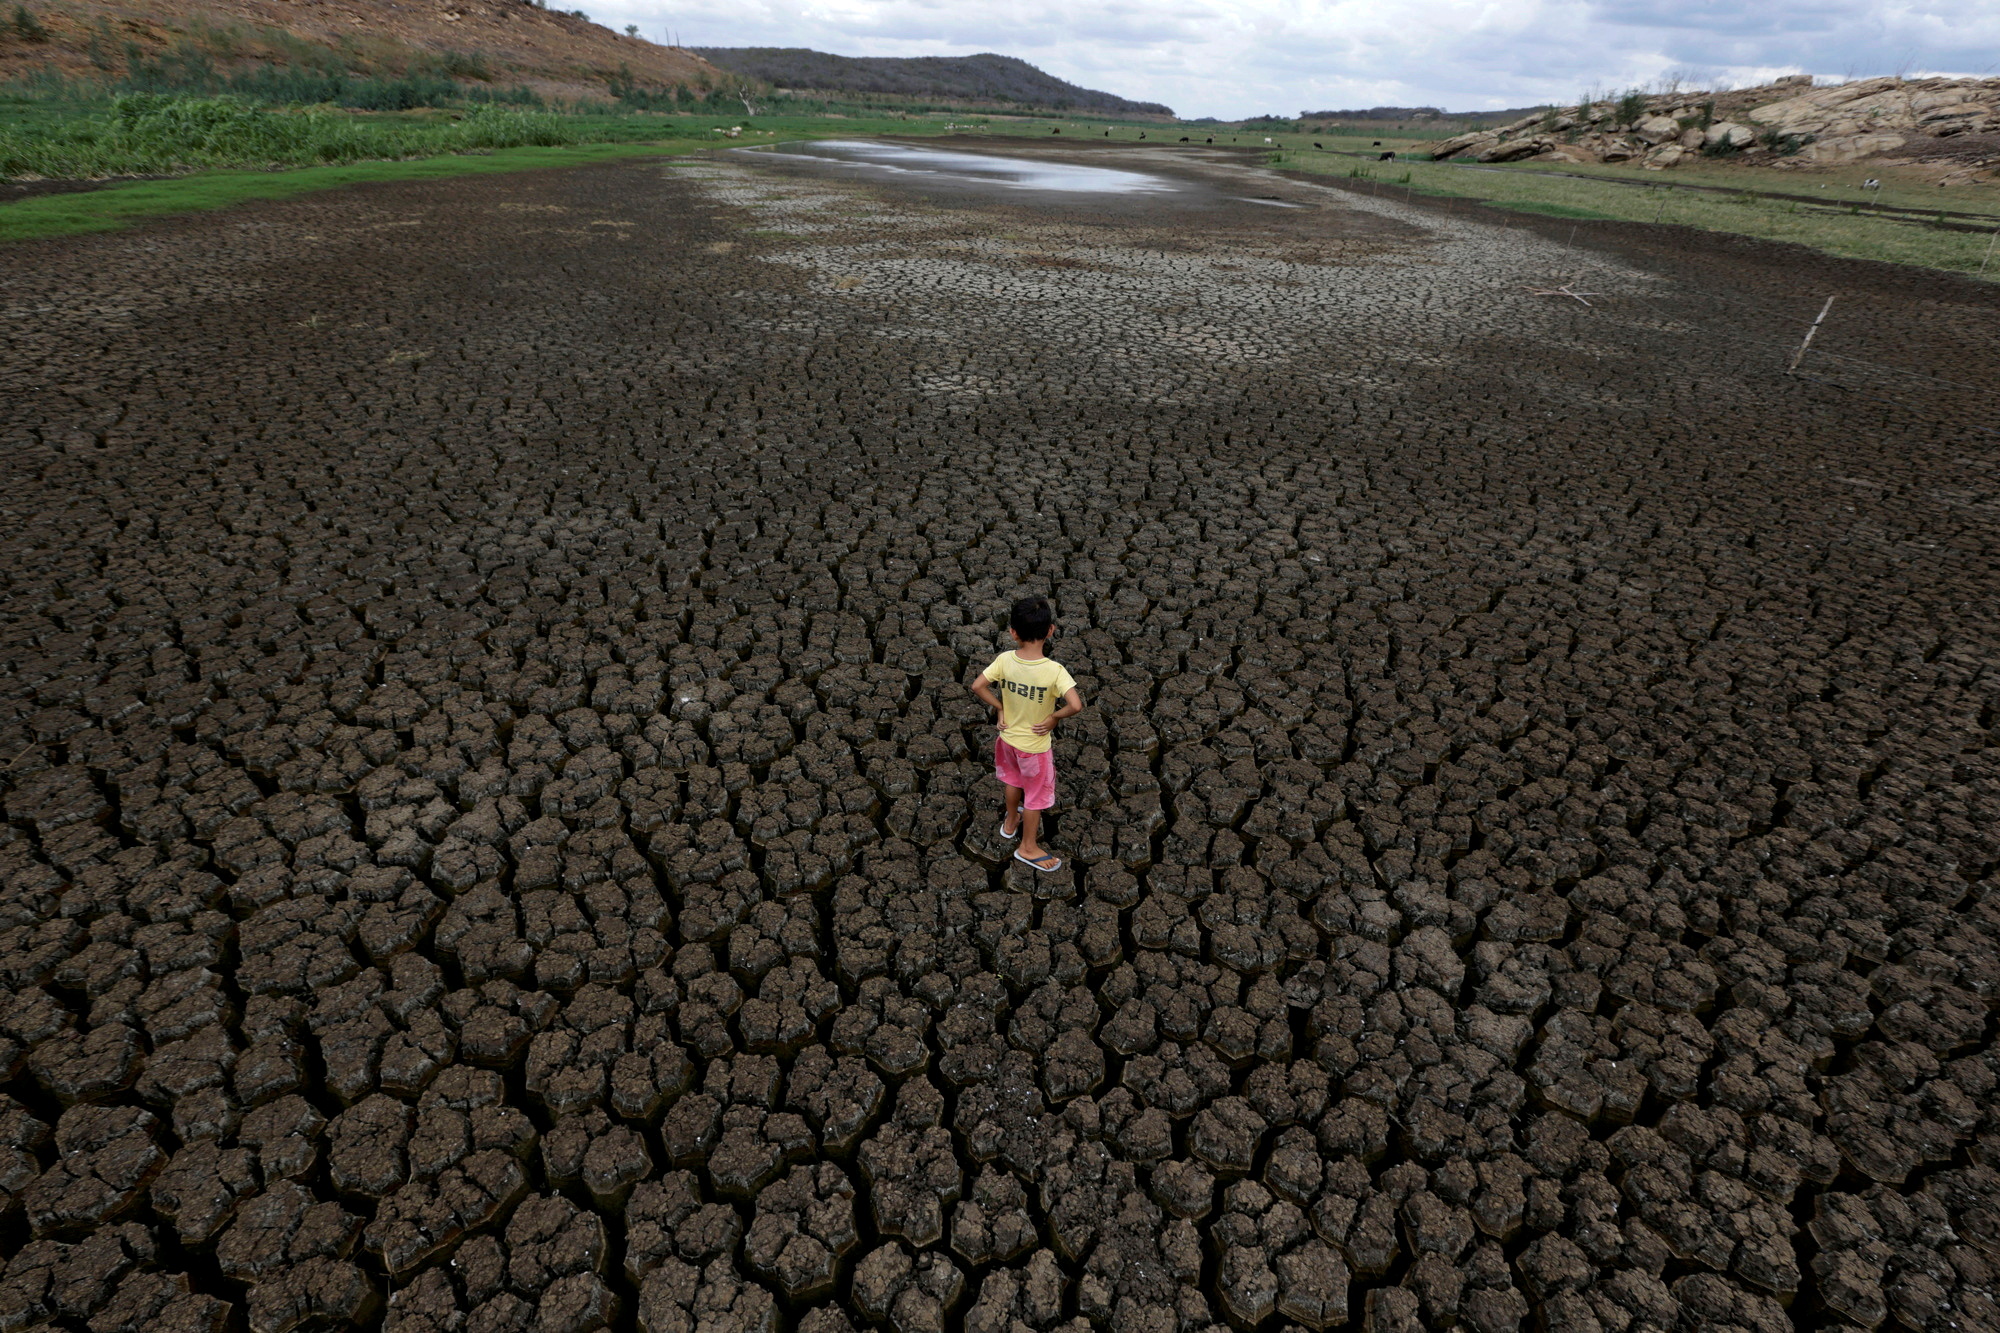 A boy stands on the cracked ground of the Boqueirao reservoir in Brazil